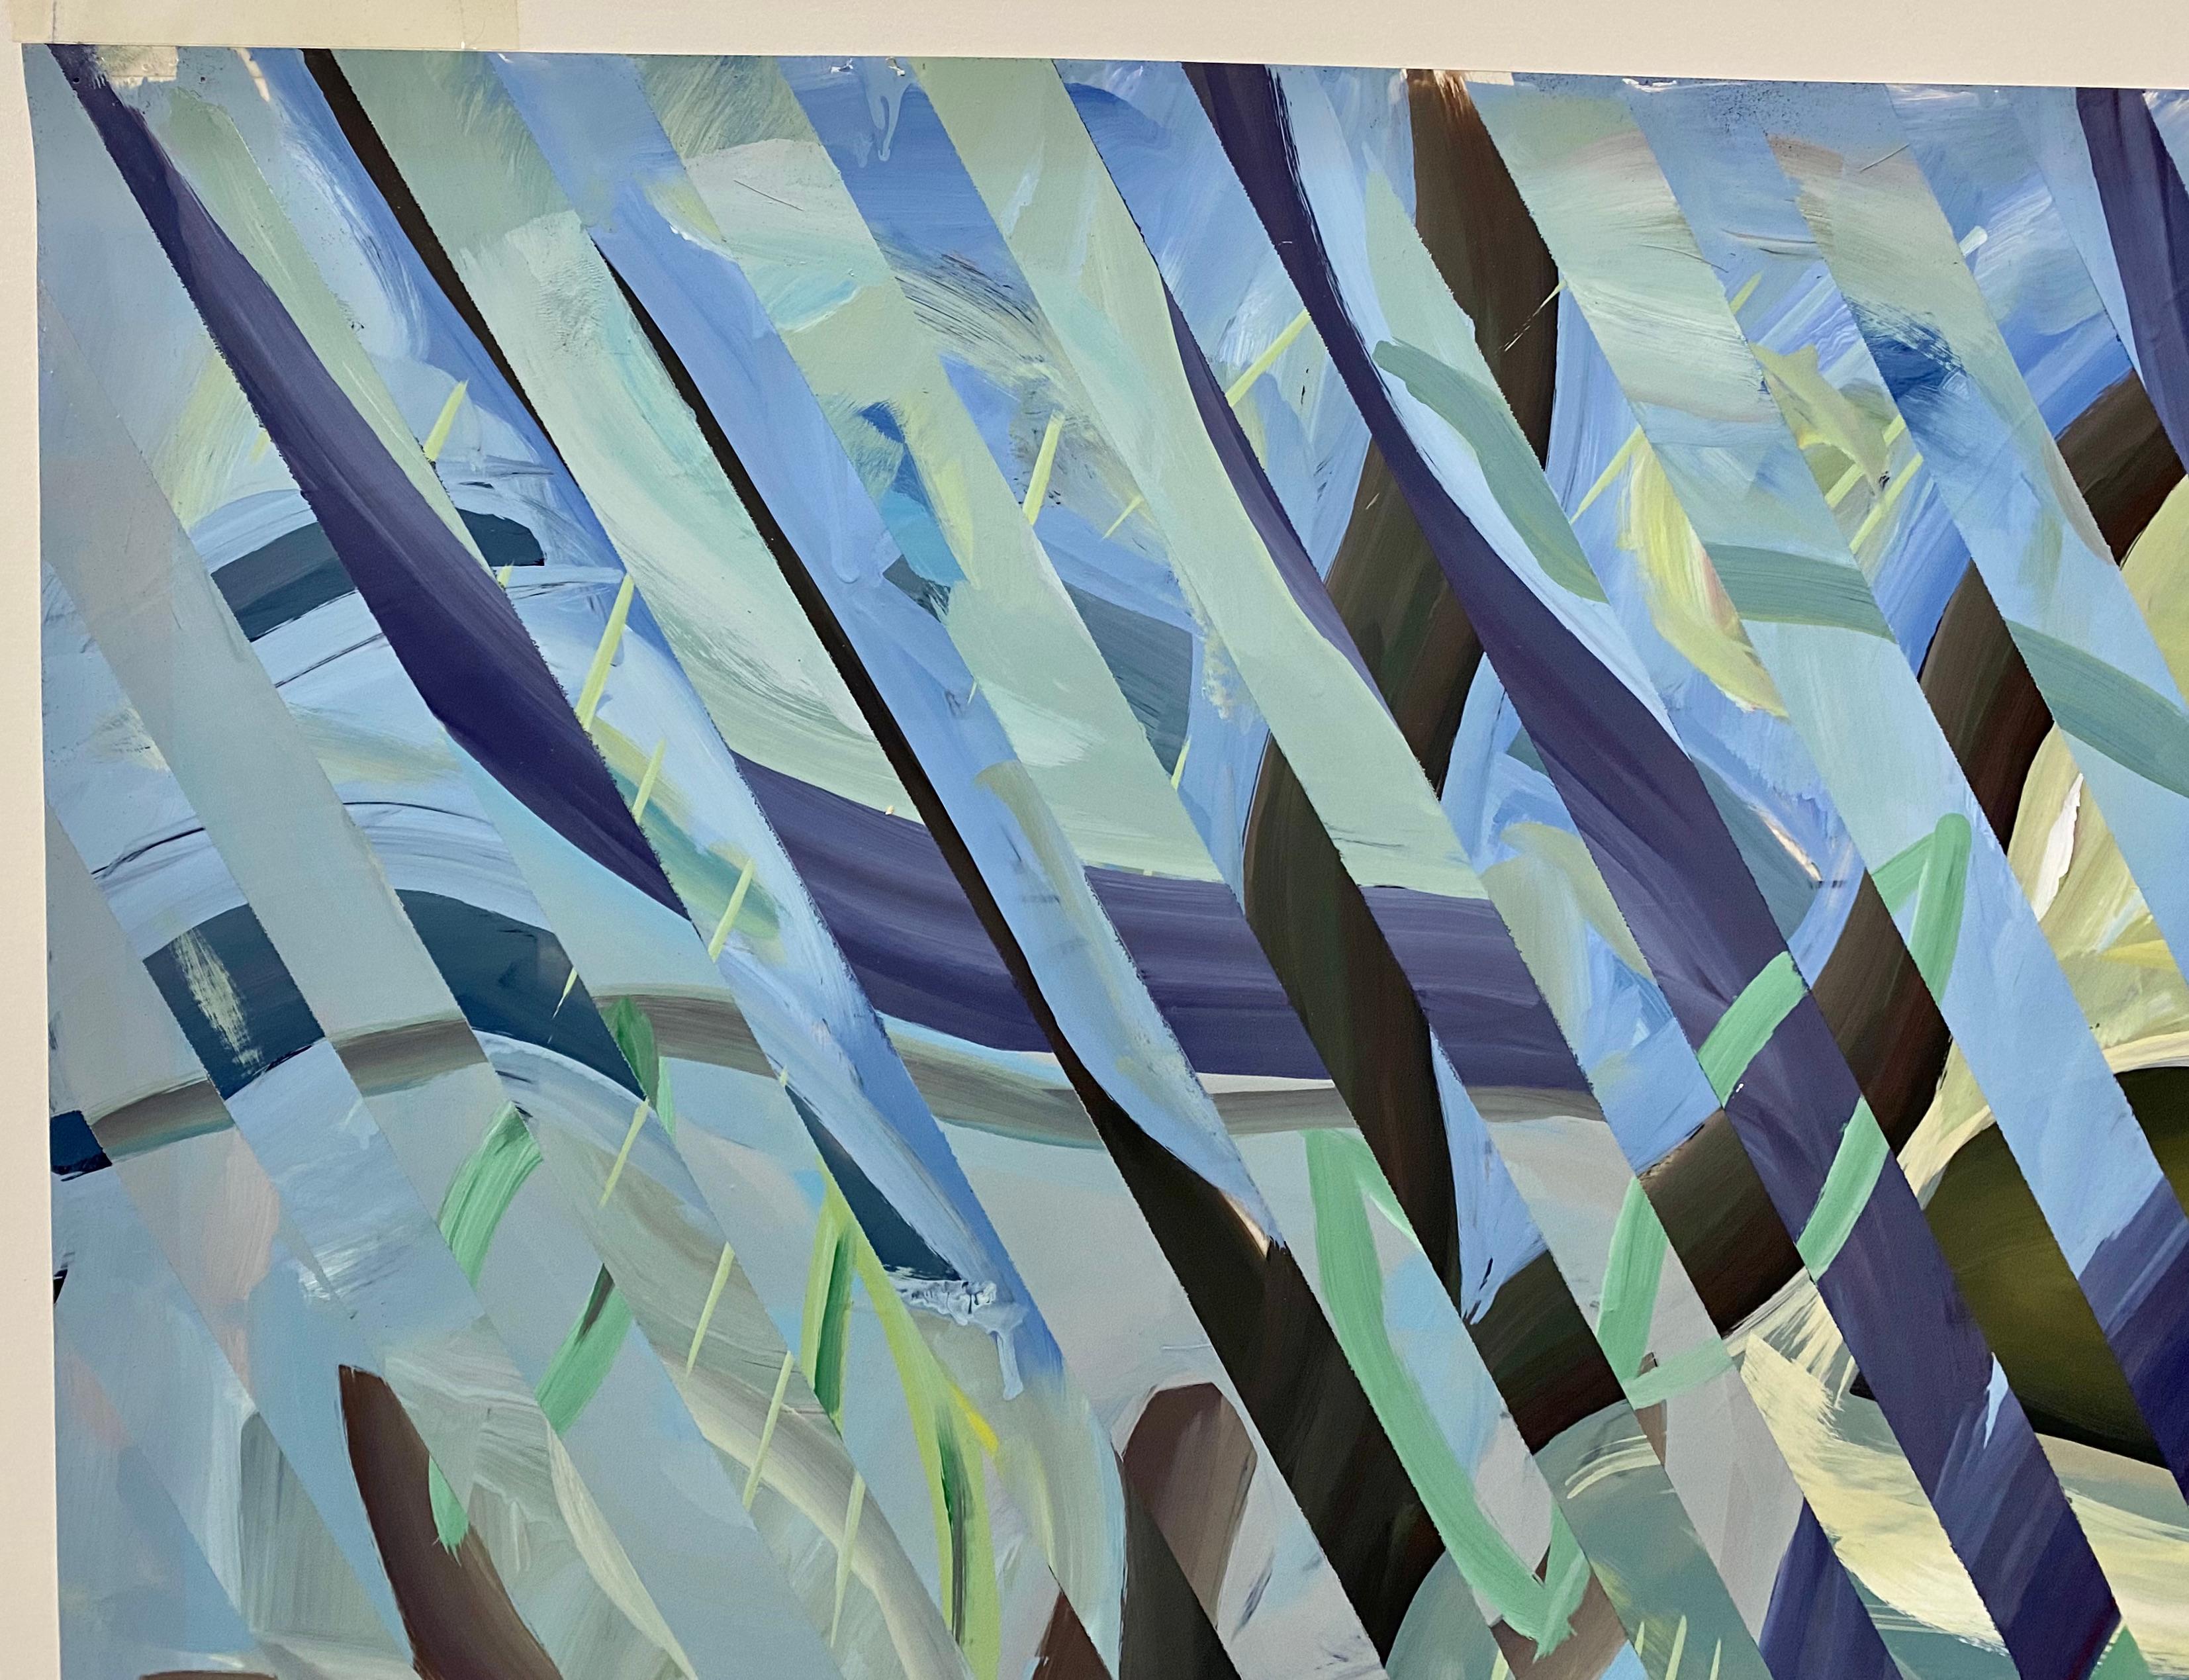 Vintage Acrylic Geometric Tropical Optical Landscape On Celluloid c.1989 - Painting by Unknown